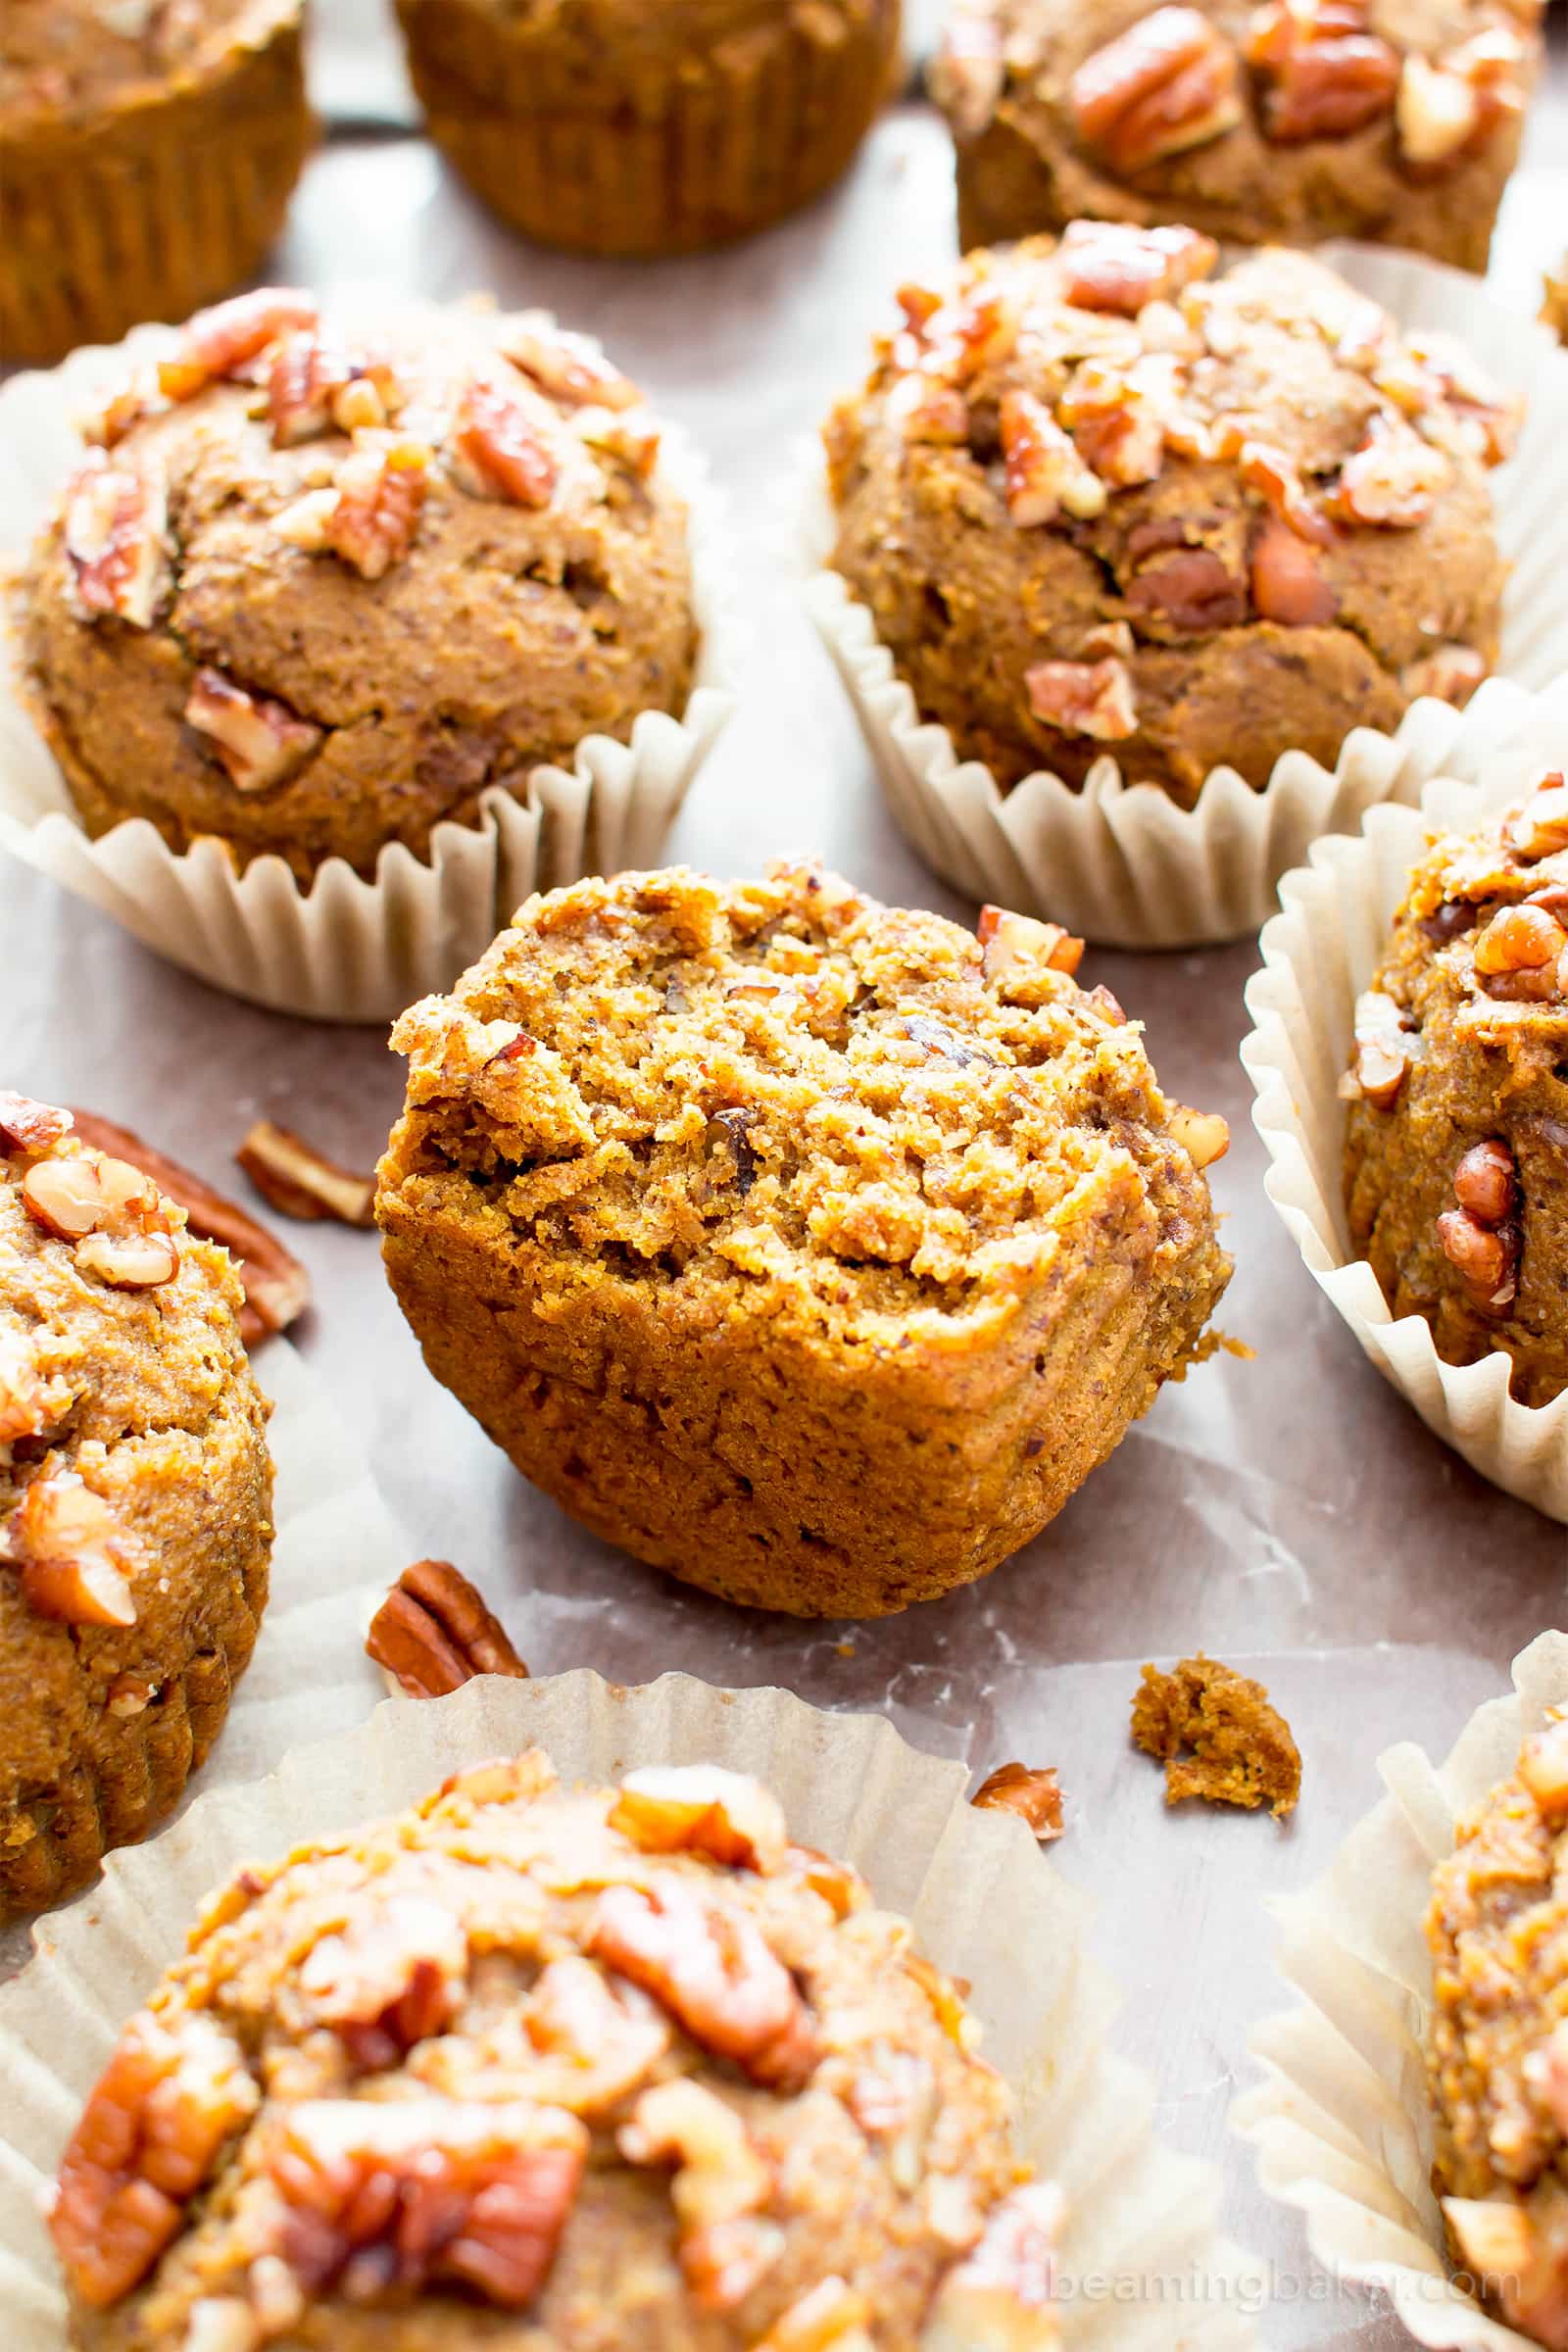 Gluten Free Maple Pecan Pumpkin Muffins (V, GF): an easy recipe for deliciously moist, pumpkin spice muffins topped with maple glazed pecans. #Vegan #GlutenFree #DairyFree #Healthy #Fall #RefinedSugarFree | BeamingBaker.com